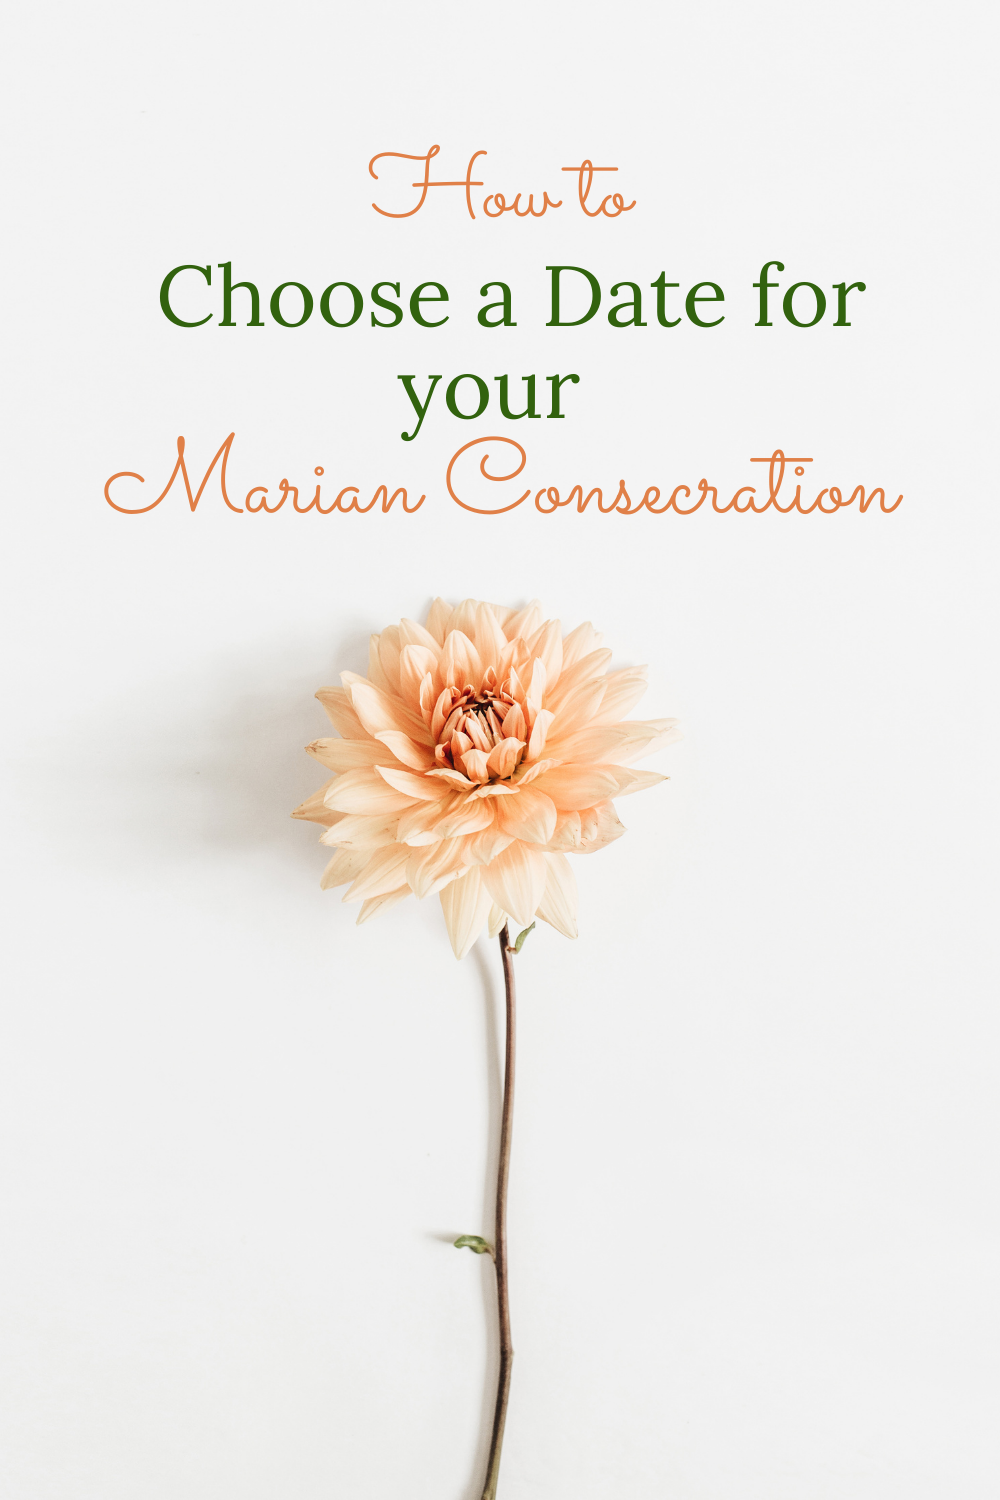 Marian Consecration Date